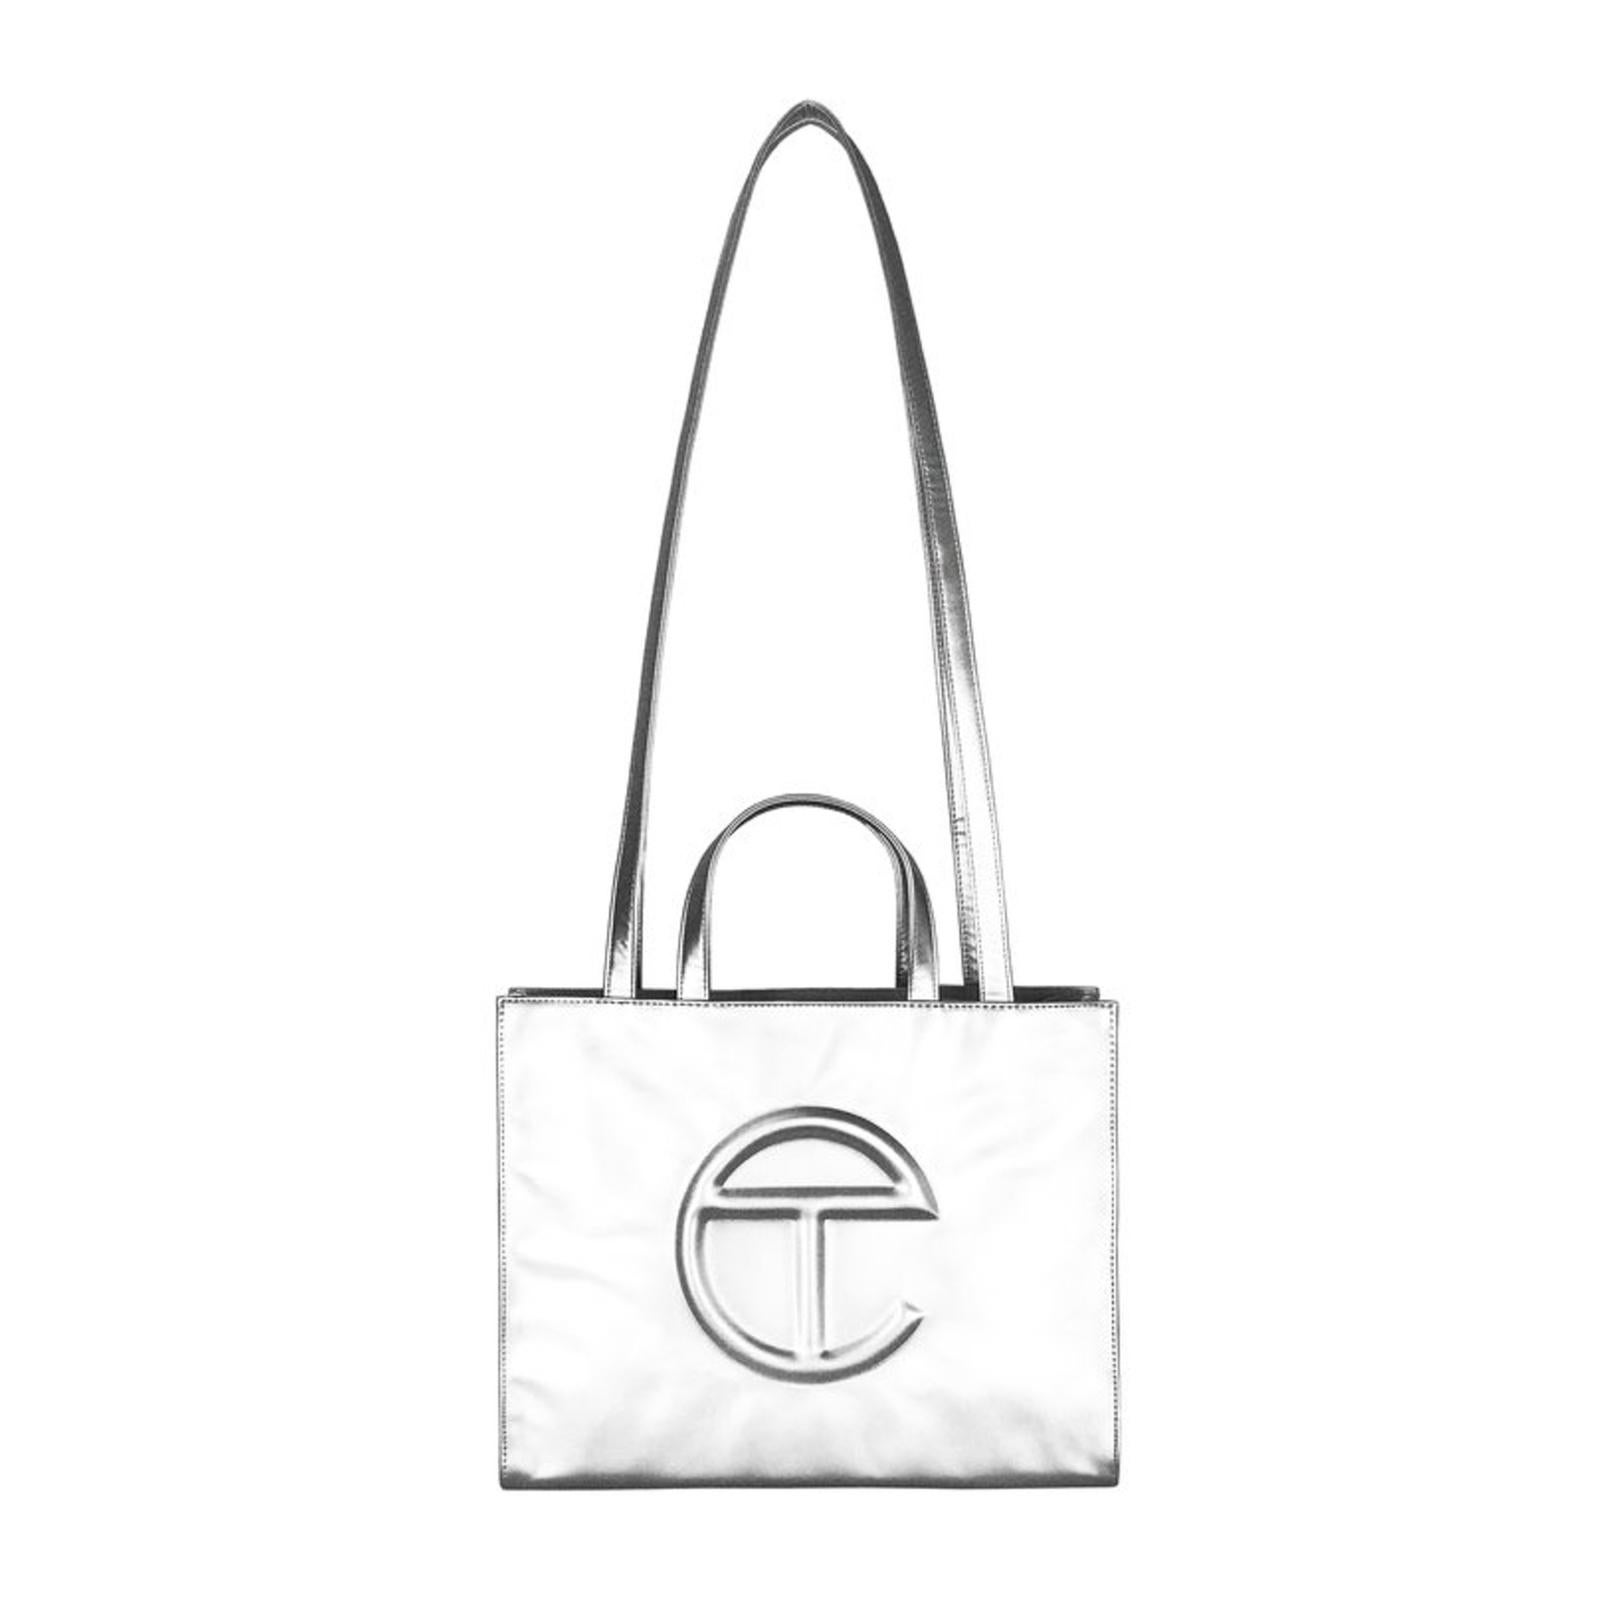 This bag is made with vegan/faux leather and twill interior lining. Featuring a double strap (handles and cross-body straps), embossed logo, and magnetic snap closure. The bag is packaged in a 100% cotton drawstring dust bag with screenprinted logo.